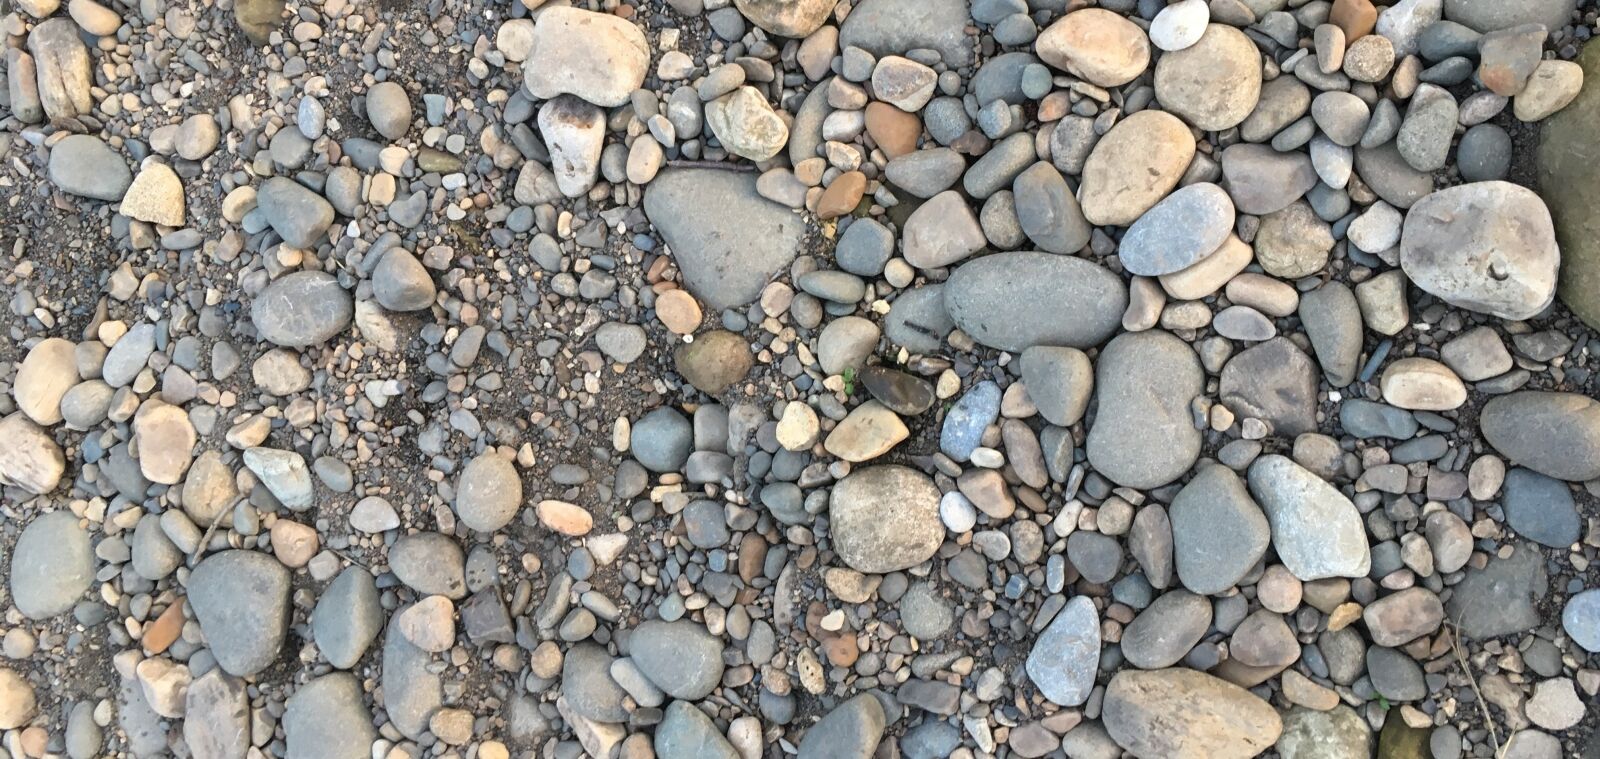 Apple iPhone SE sample photo. Rocks, pebbles, abstract photography